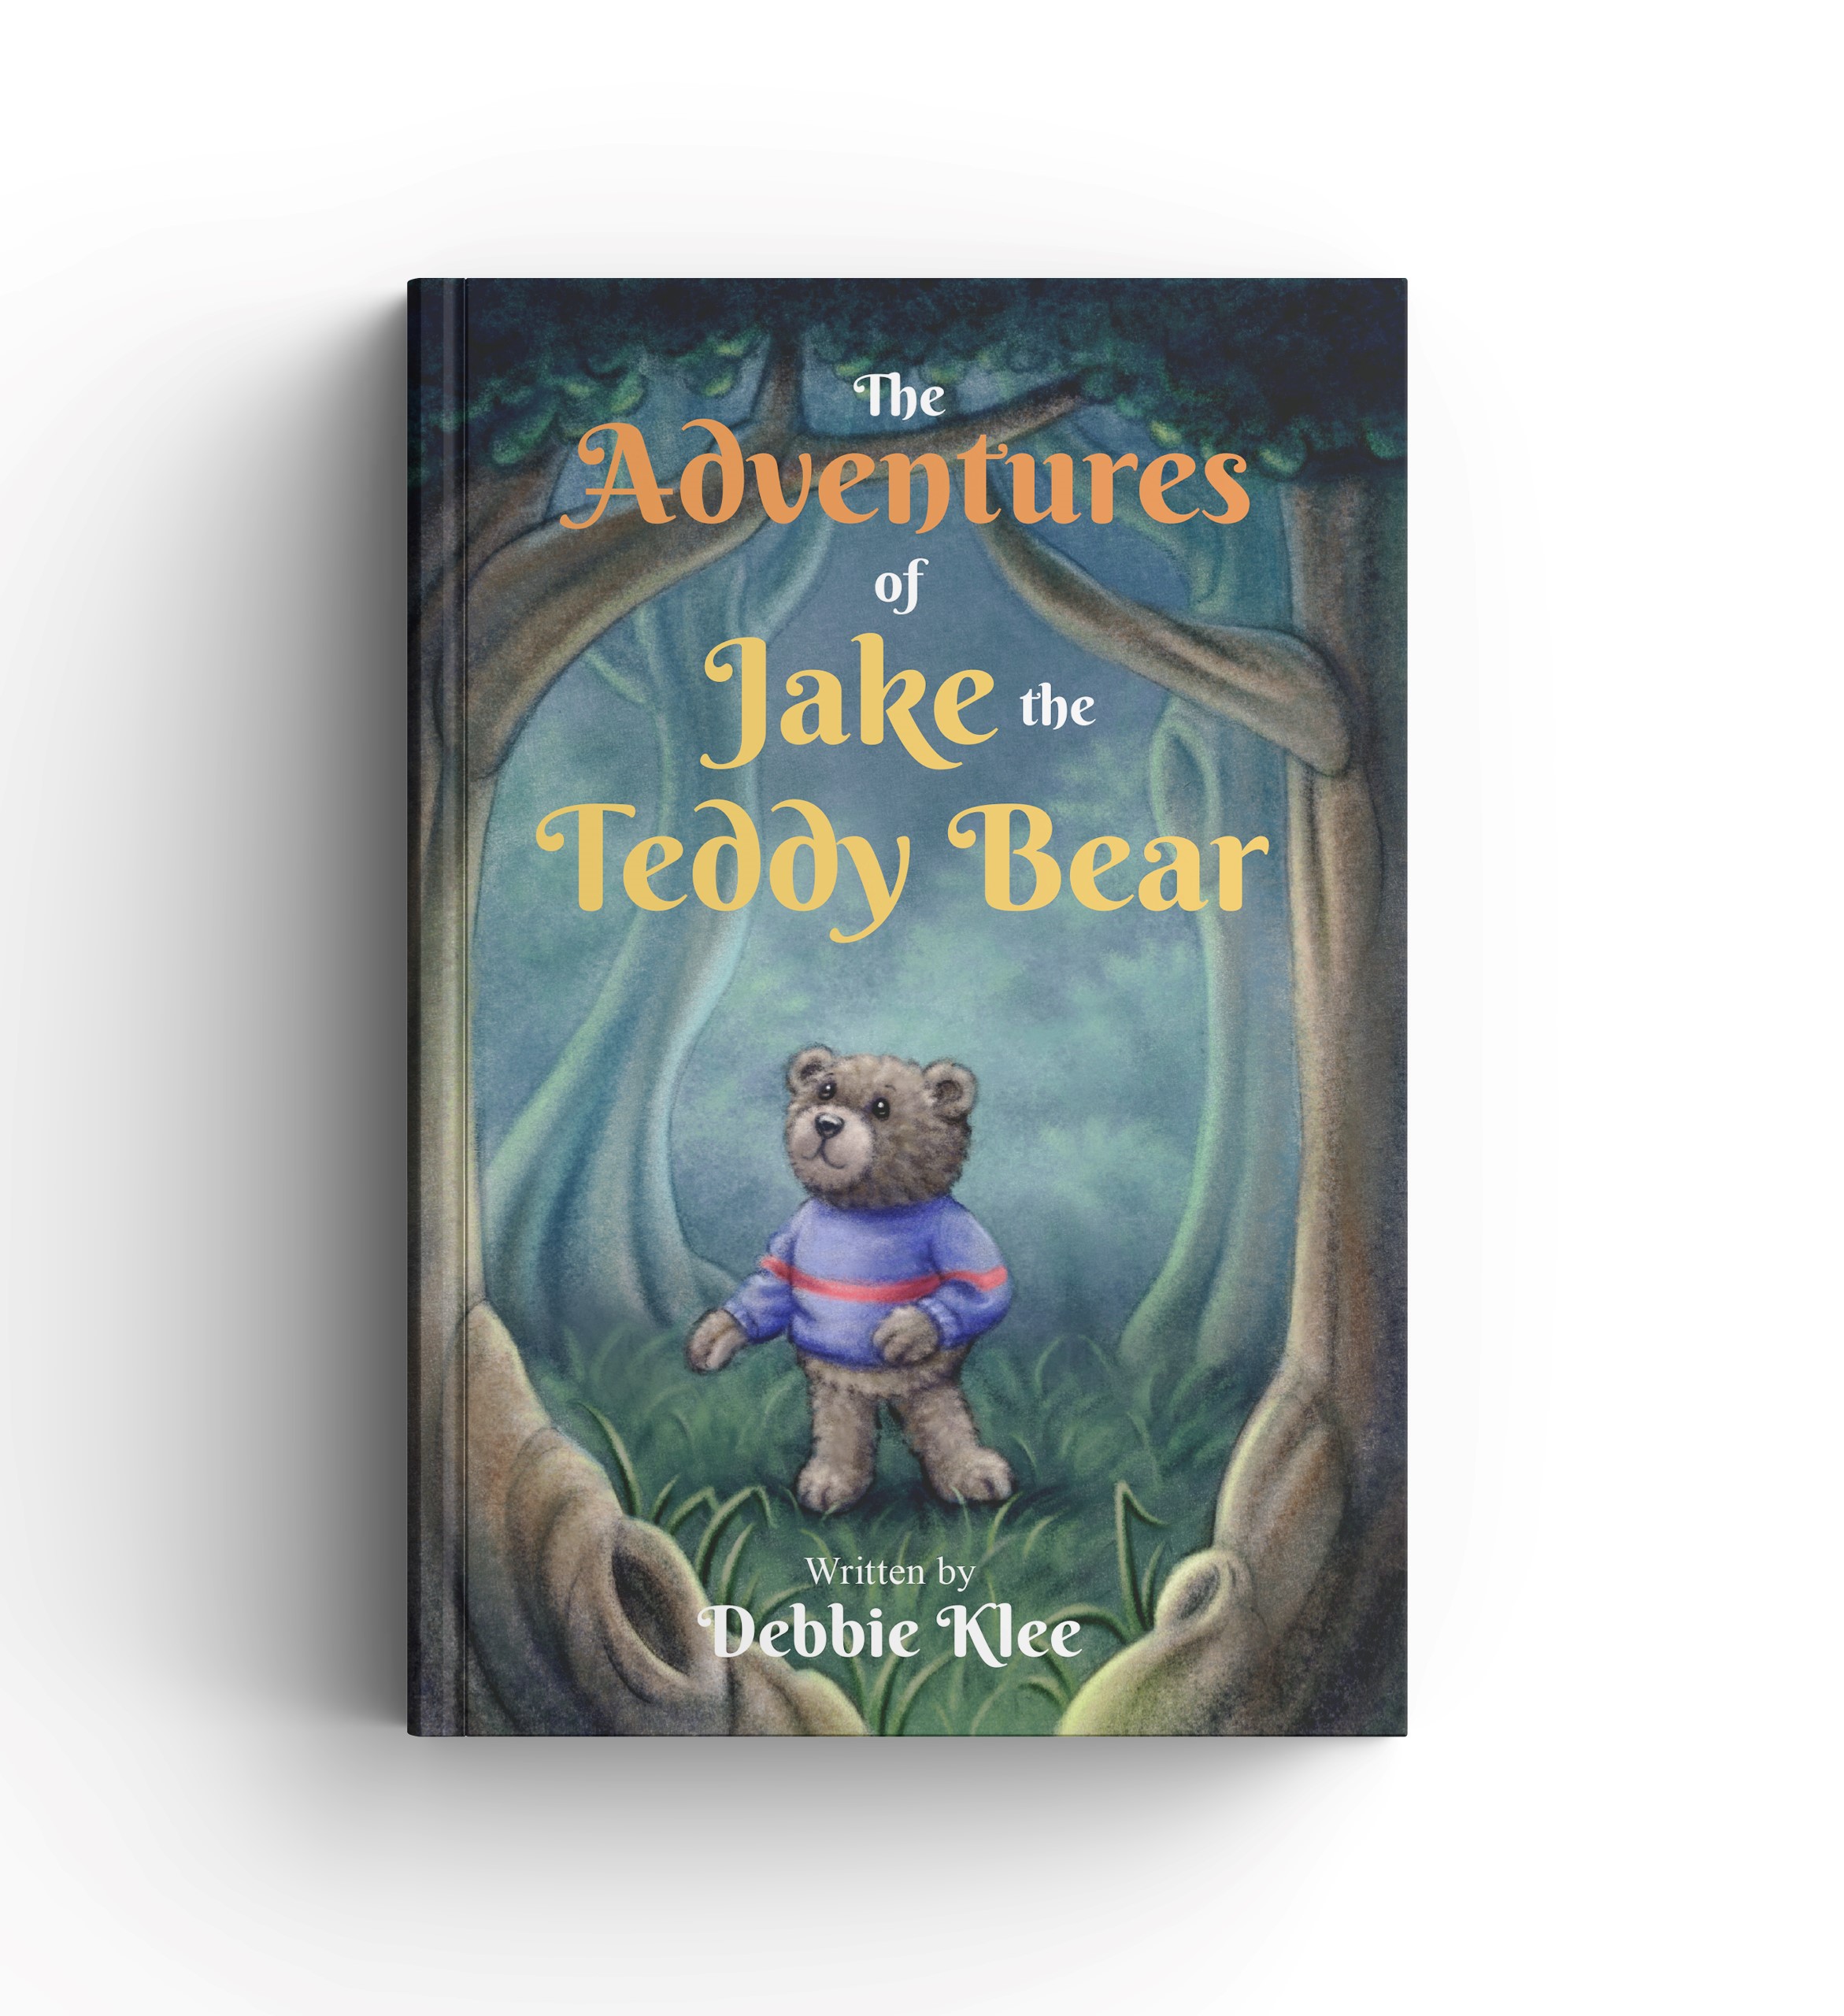 The Adventures of Jake the Teddy Bear Book Image